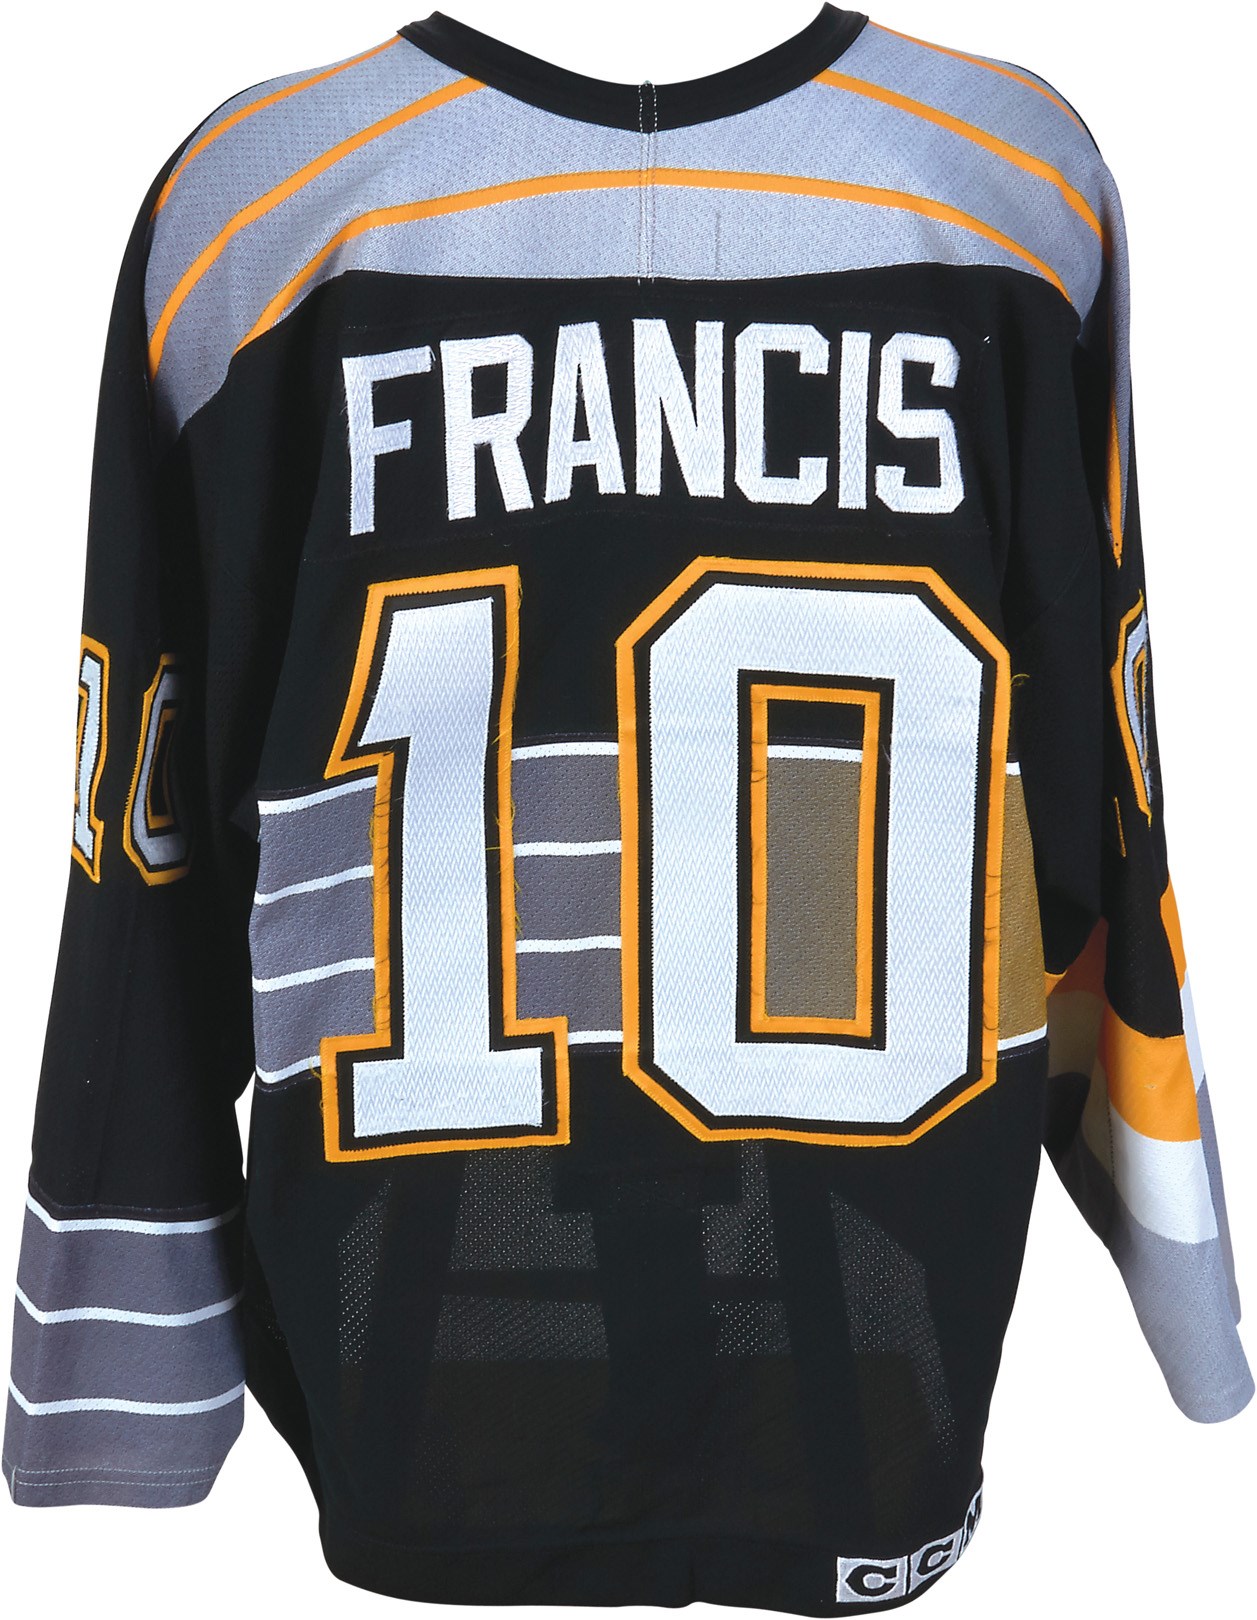 Hockey - 1995-96 Ron Francis Pittsburgh Penguins Game Worn Jersey (Photo-Matched)